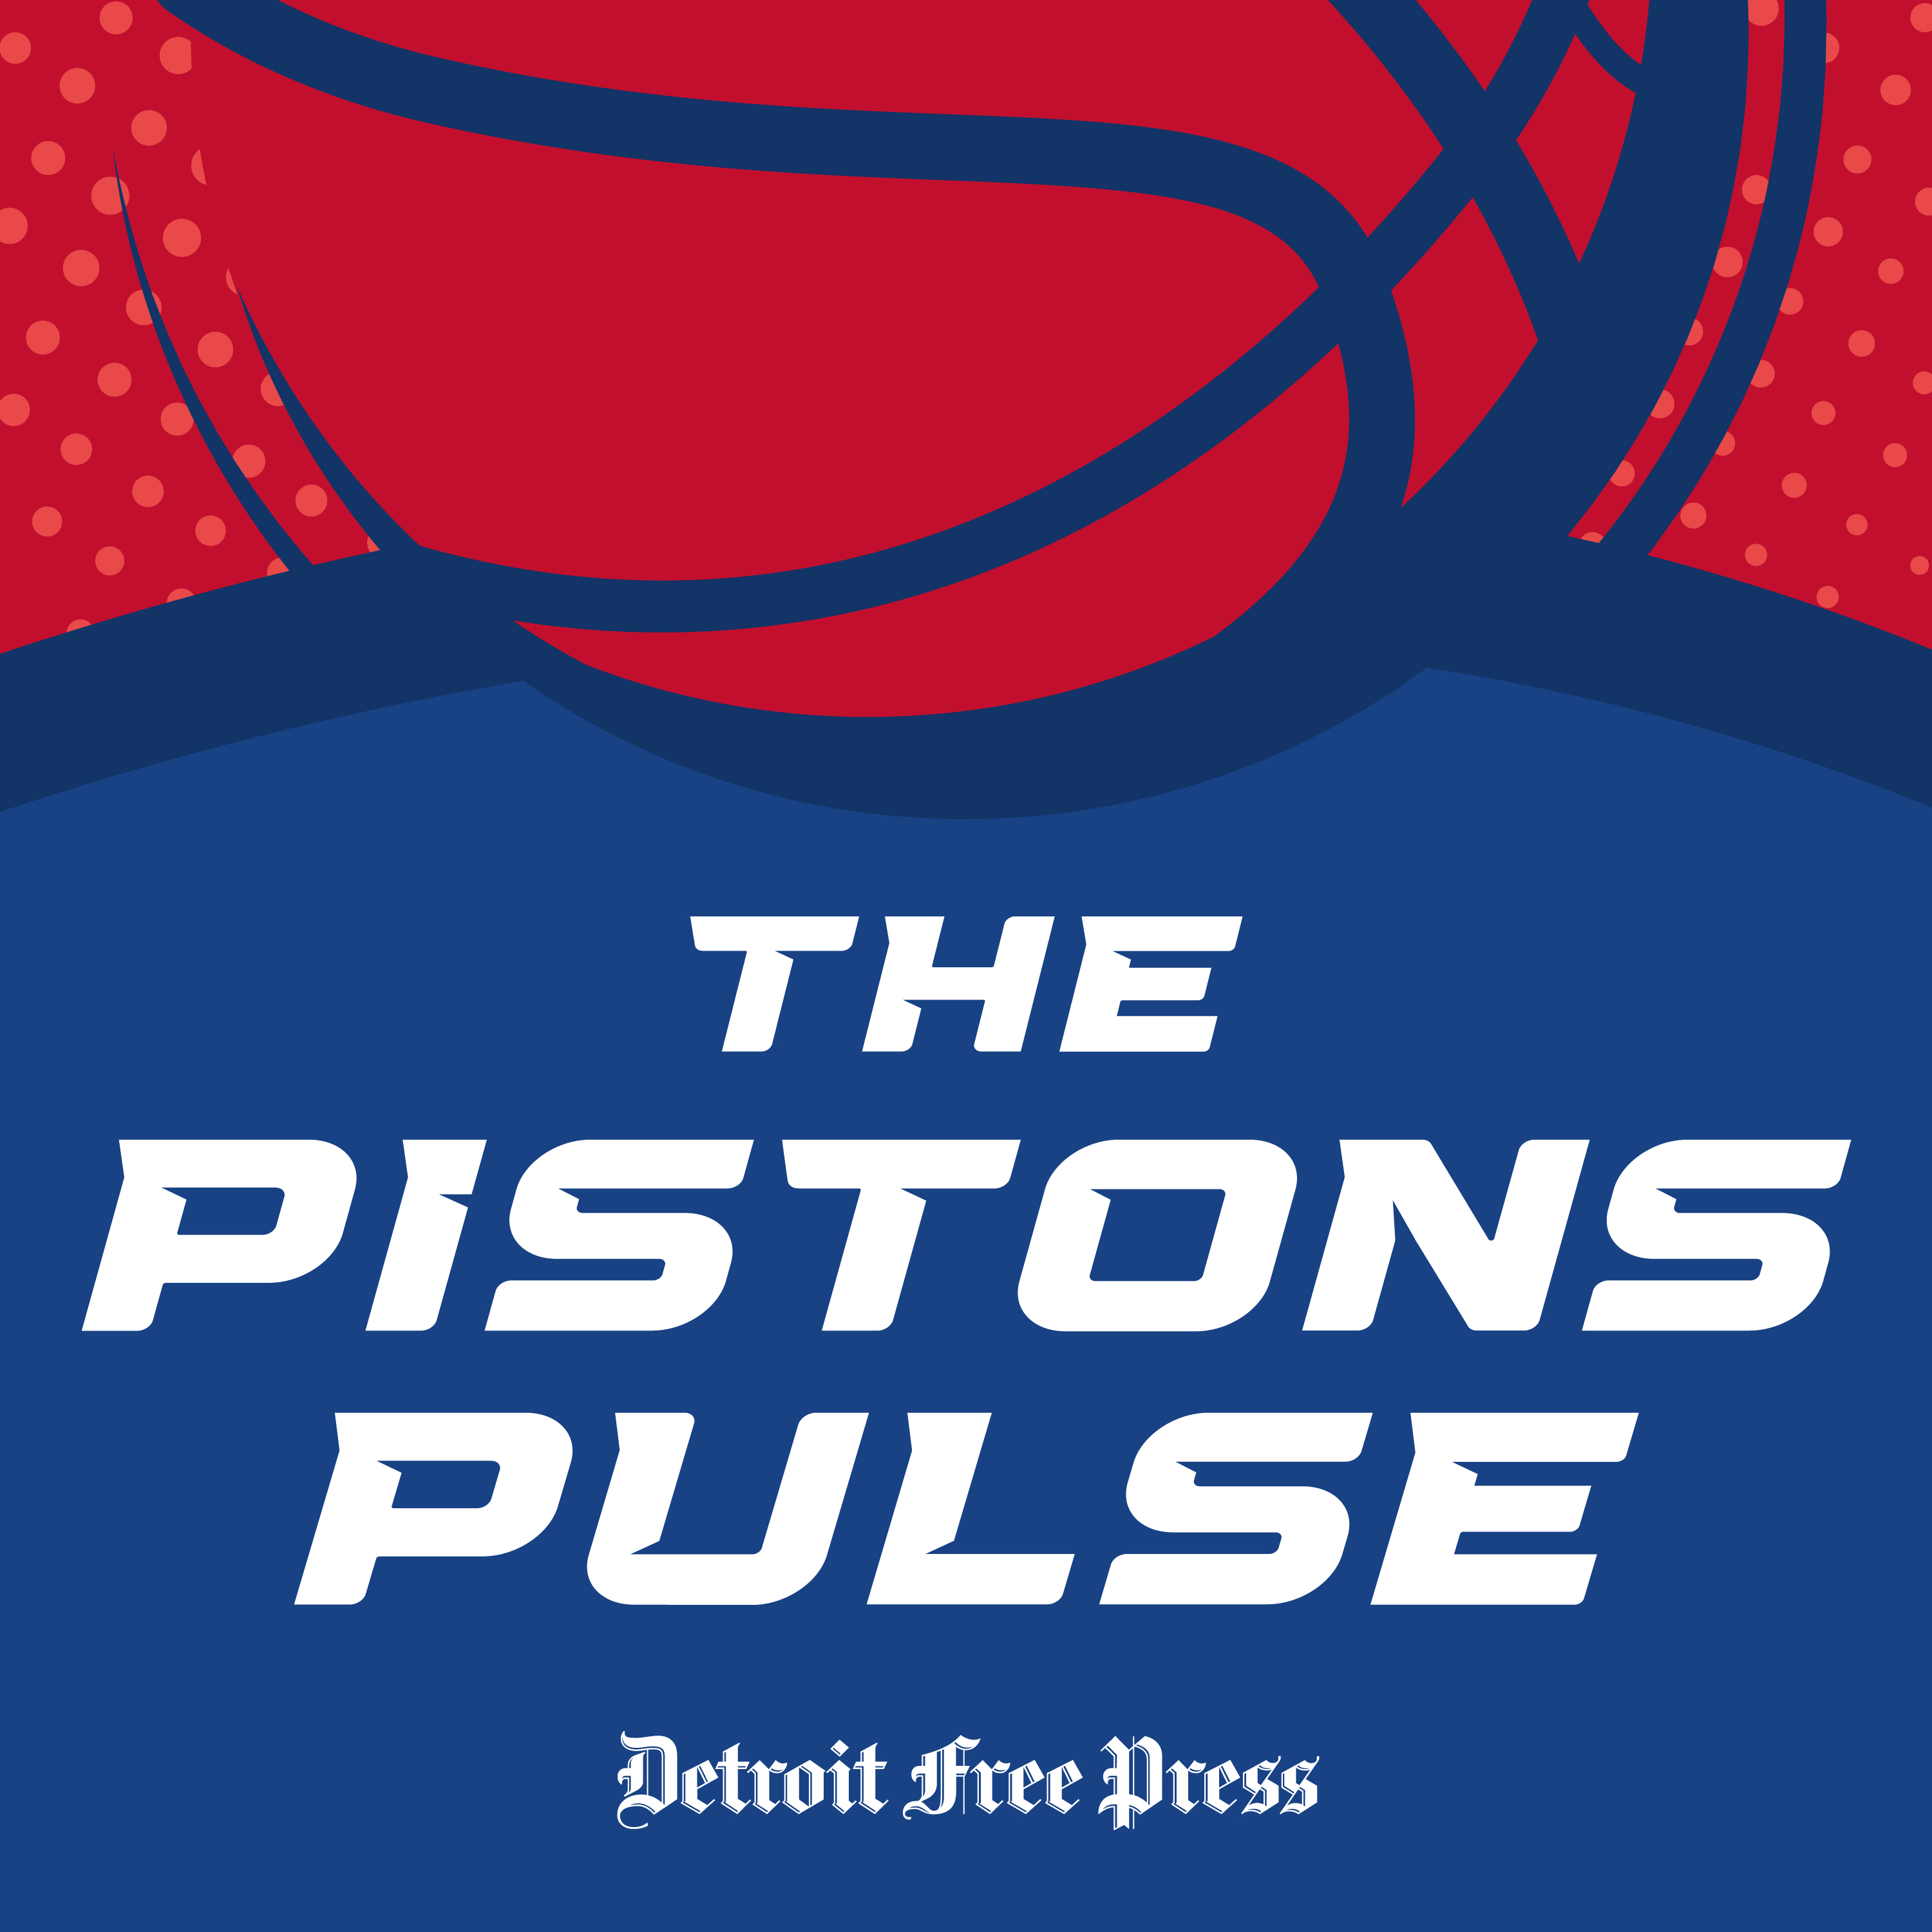 What Detroit Pistons off-season moves would you make?